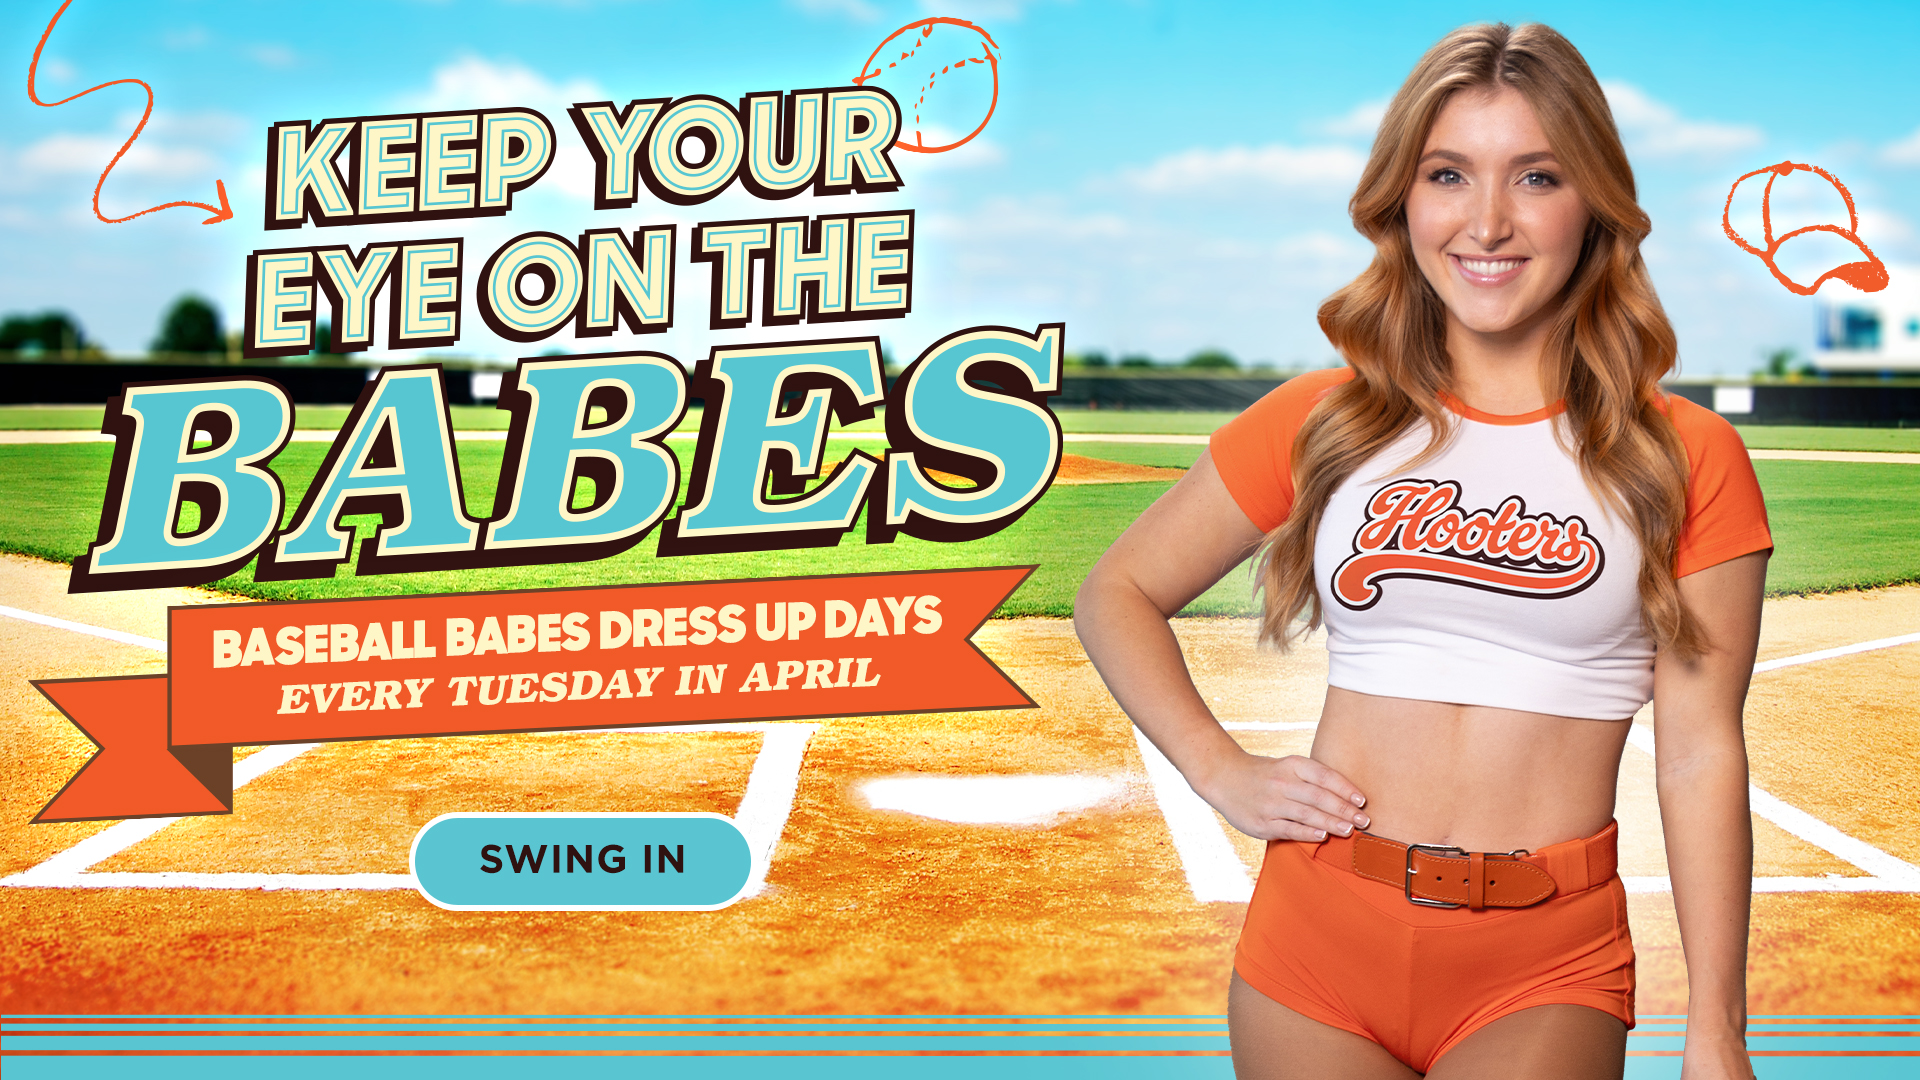 Keep your eye on the babes. Baseball babes dress up days every Tuesday in April.